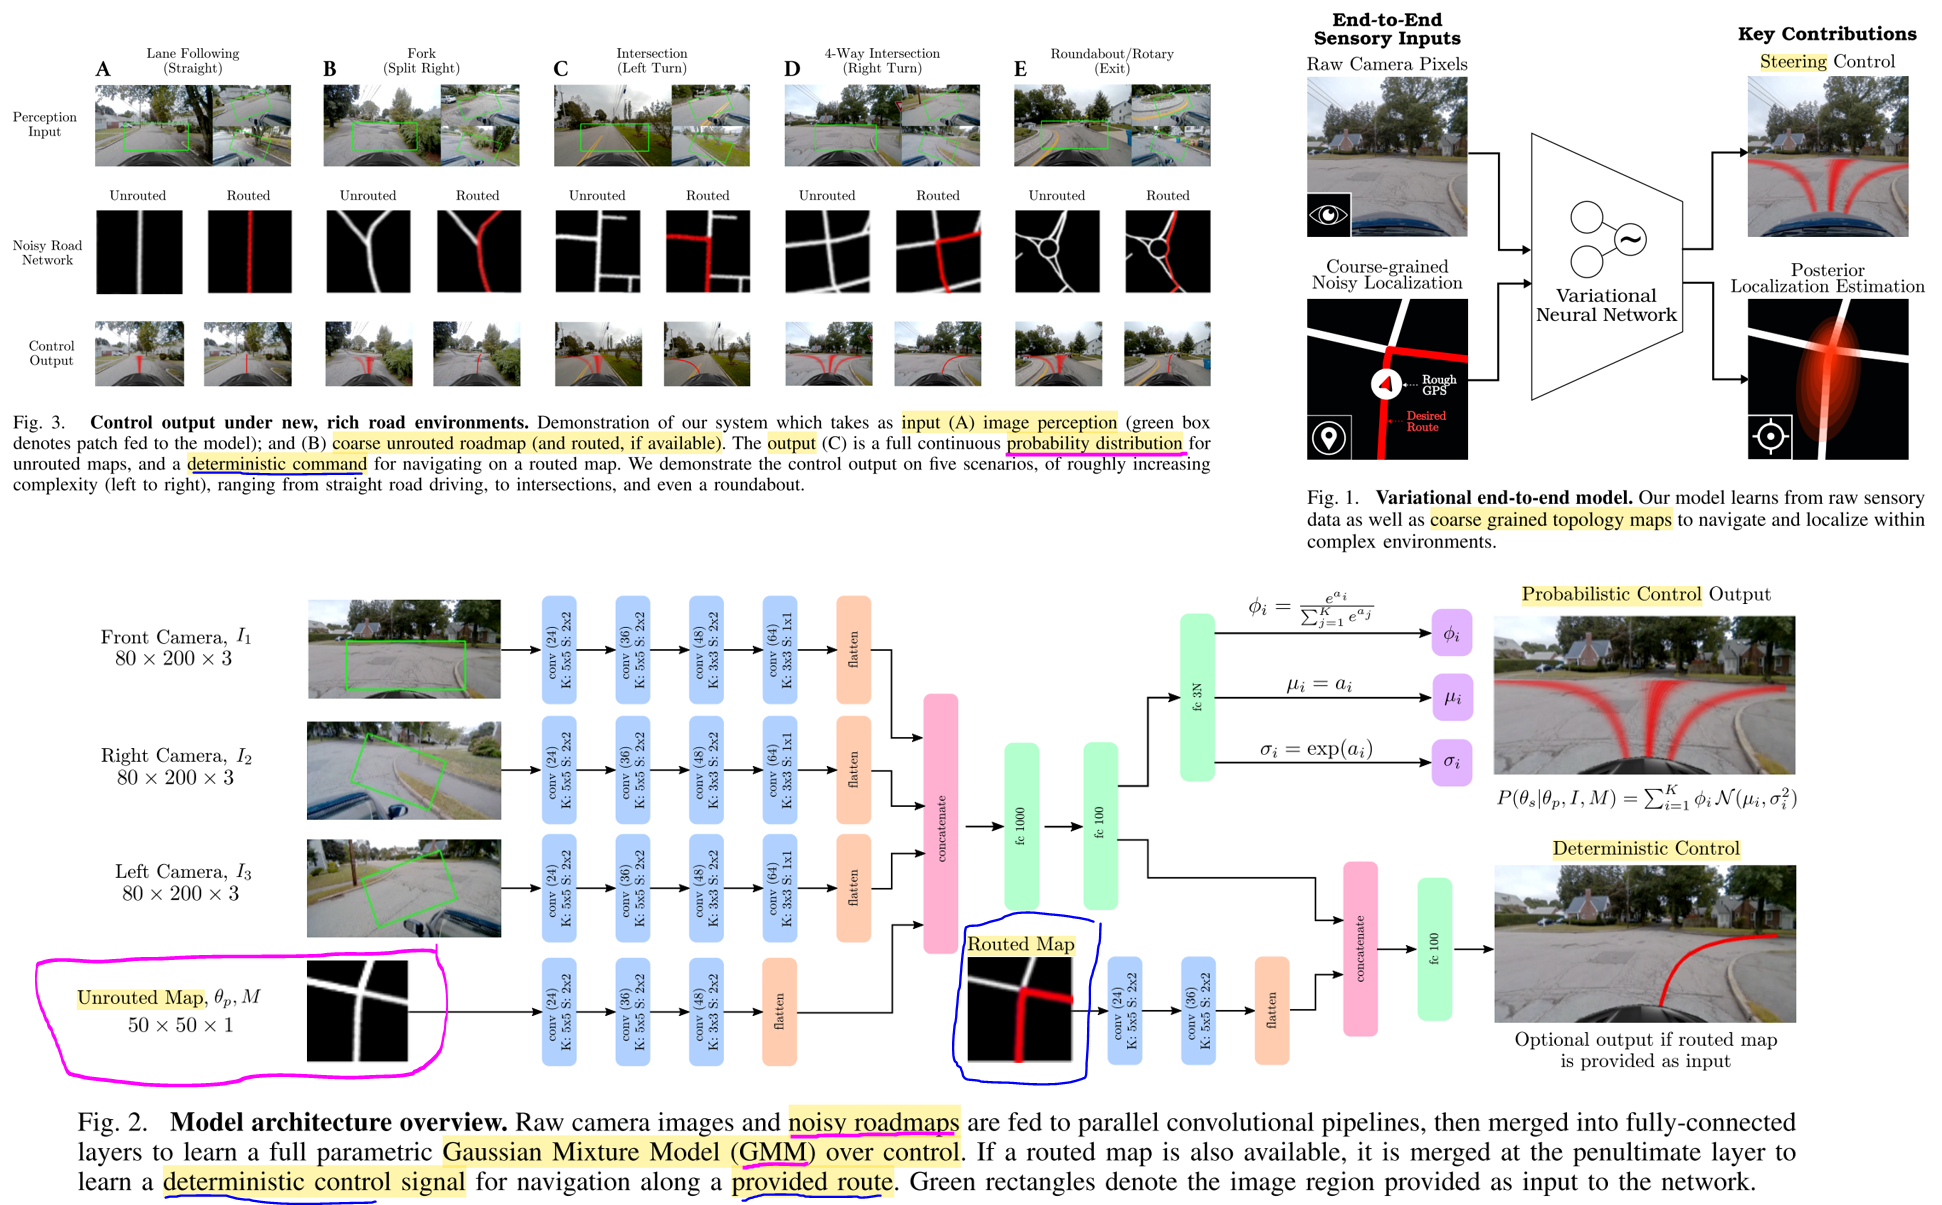 In a subsequent work, the VAE is conditioned onto the road topology. It serves multiple purposes such as localization and end-to-end navigation. The routed or unrouted map given as additional input goes toward the mid-to-end approach where processing is performed and/or external knowledge is embedded. Source.